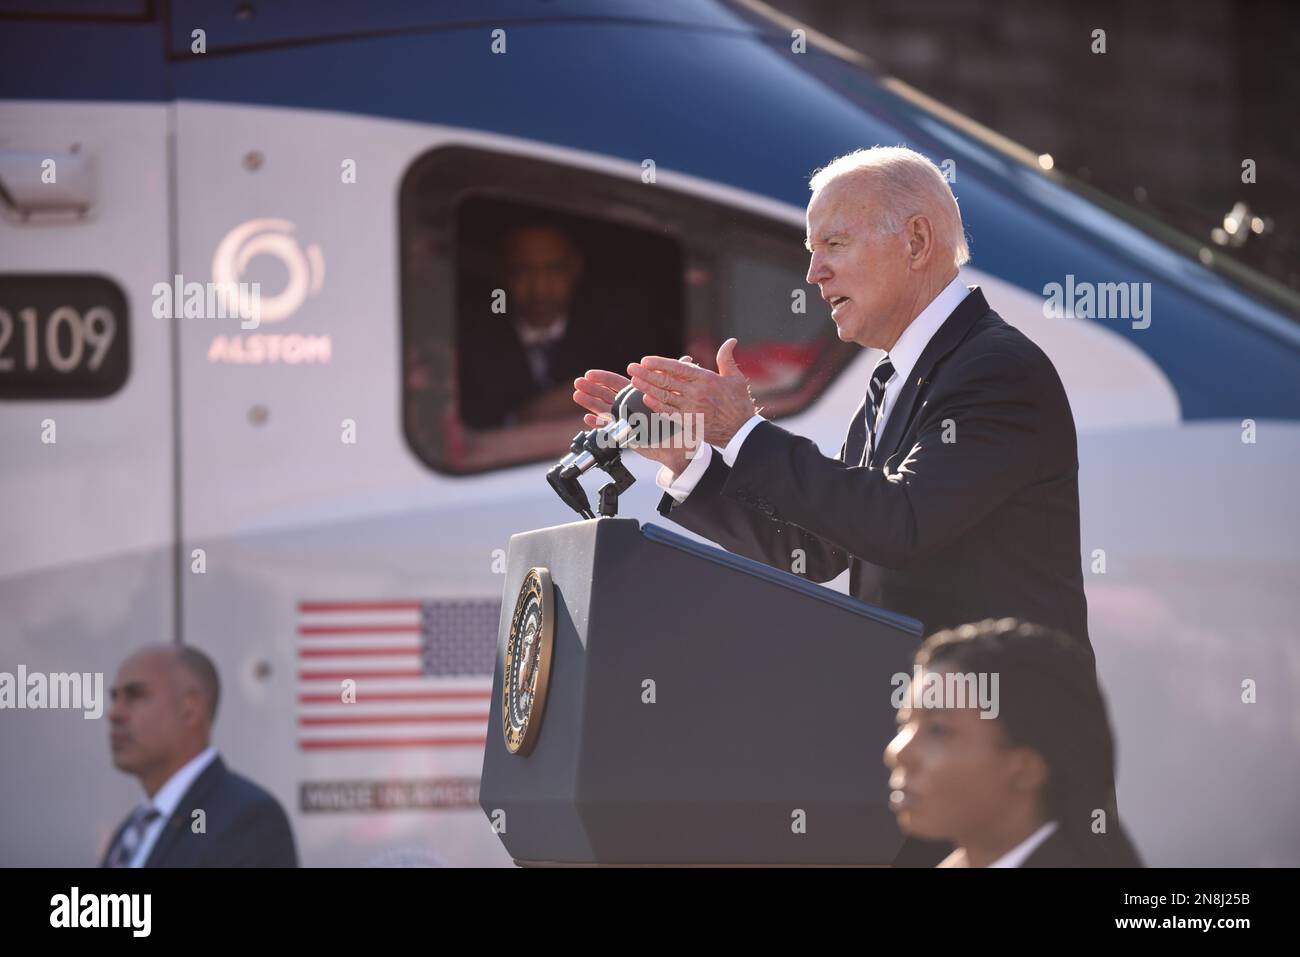 Baltimore, United States of America. 30 January, 2023. U.S President Joe Biden delivers remarks during an event announcing the replacement of the 150-year-old Baltimore and Potomac Tunnel at the Falls Road Amtrak maintenance building, January 30, 2023 in Baltimore, Maryland.  Credit: Patrick Siebert/MDGovpics/Alamy Live News Stock Photo